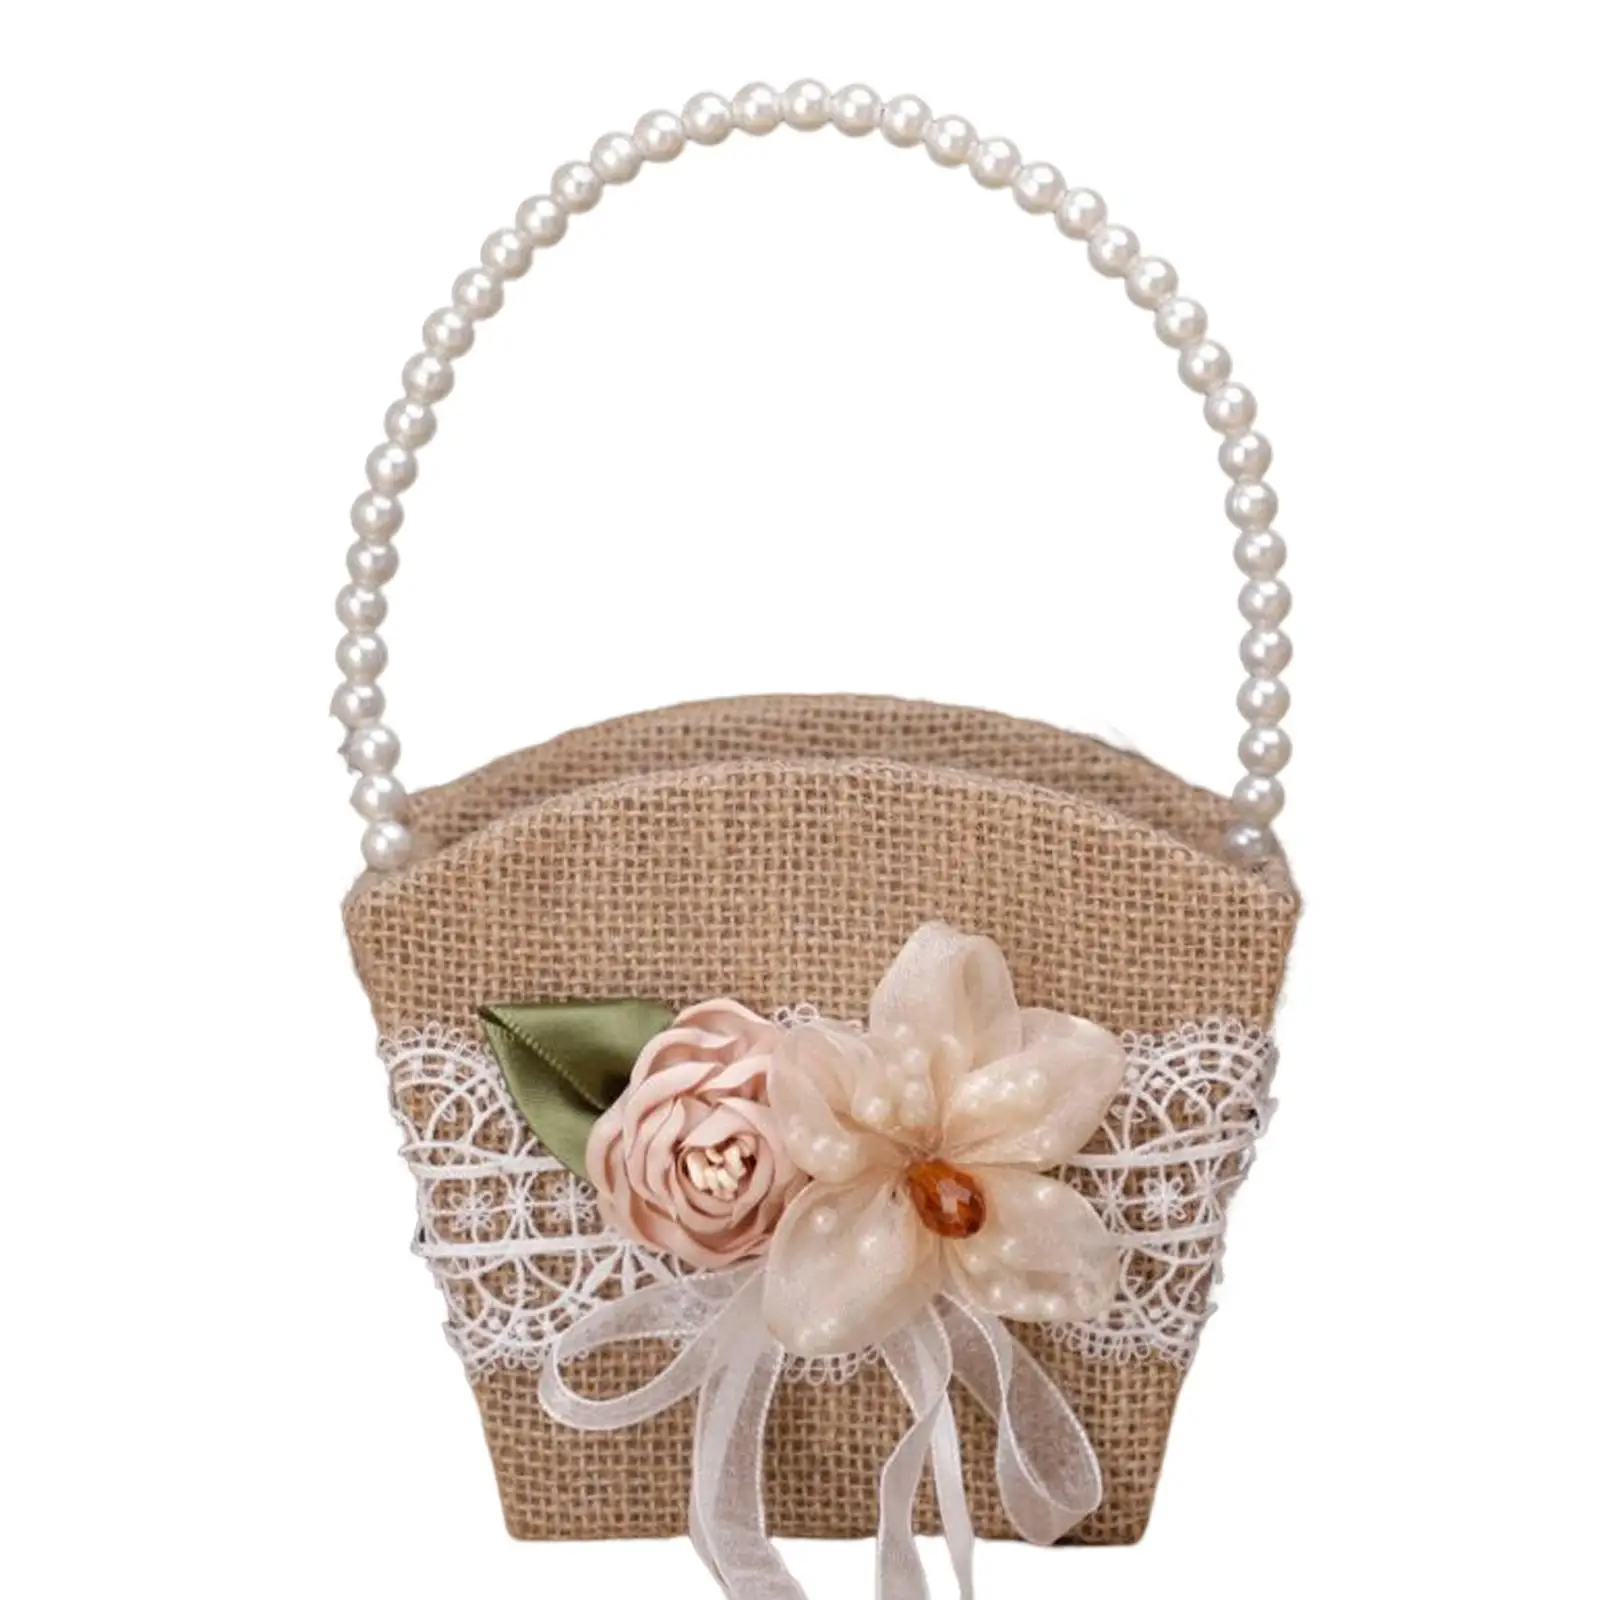 Burlap Flower Basket pearl Handle , Lace Satin Rustic Ribbon for Wedding Ceremony Home Parties